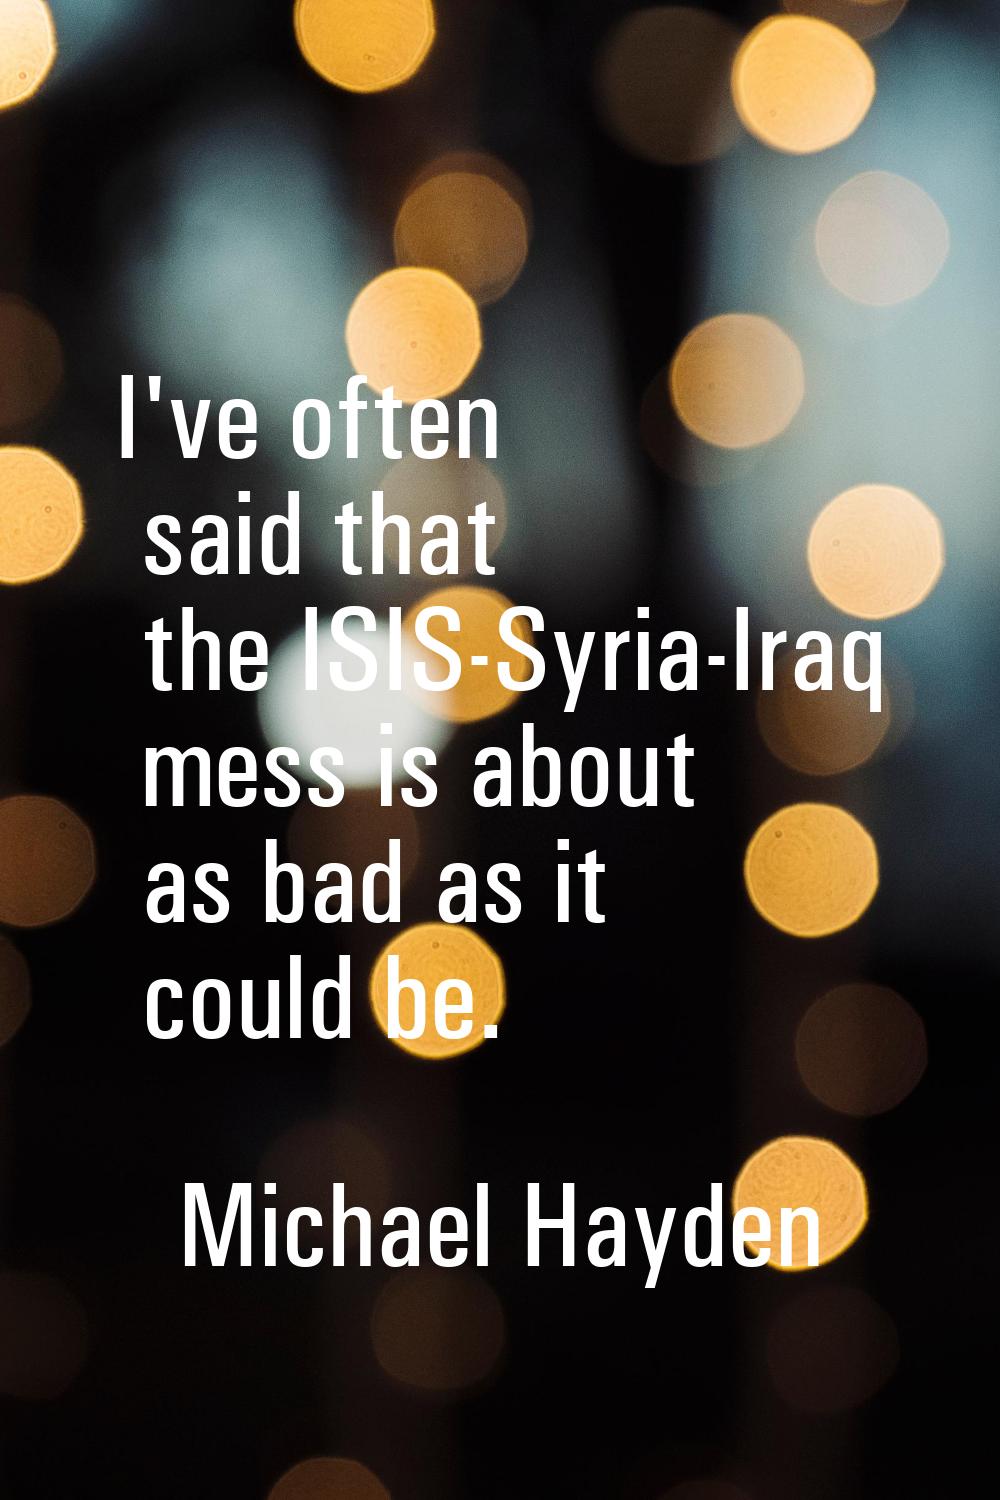 I've often said that the ISIS-Syria-Iraq mess is about as bad as it could be.